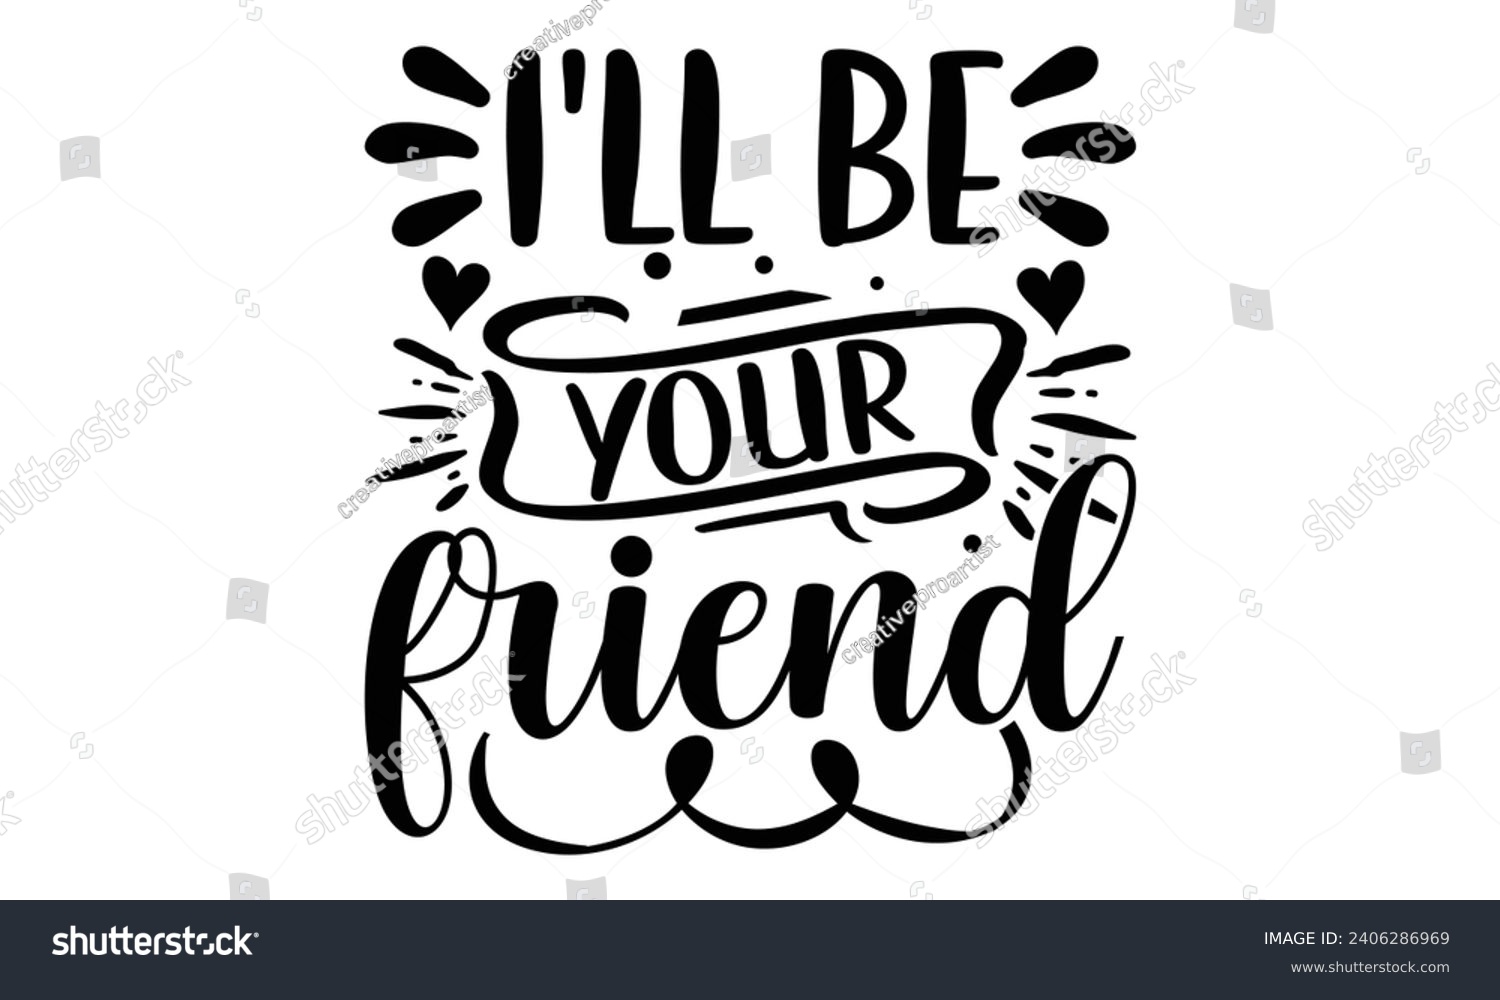 SVG of I'll Be Your Friend- Best friends t- shirt design, Hand drawn vintage illustration with hand-lettering and decoration elements, greeting card template with typography text svg